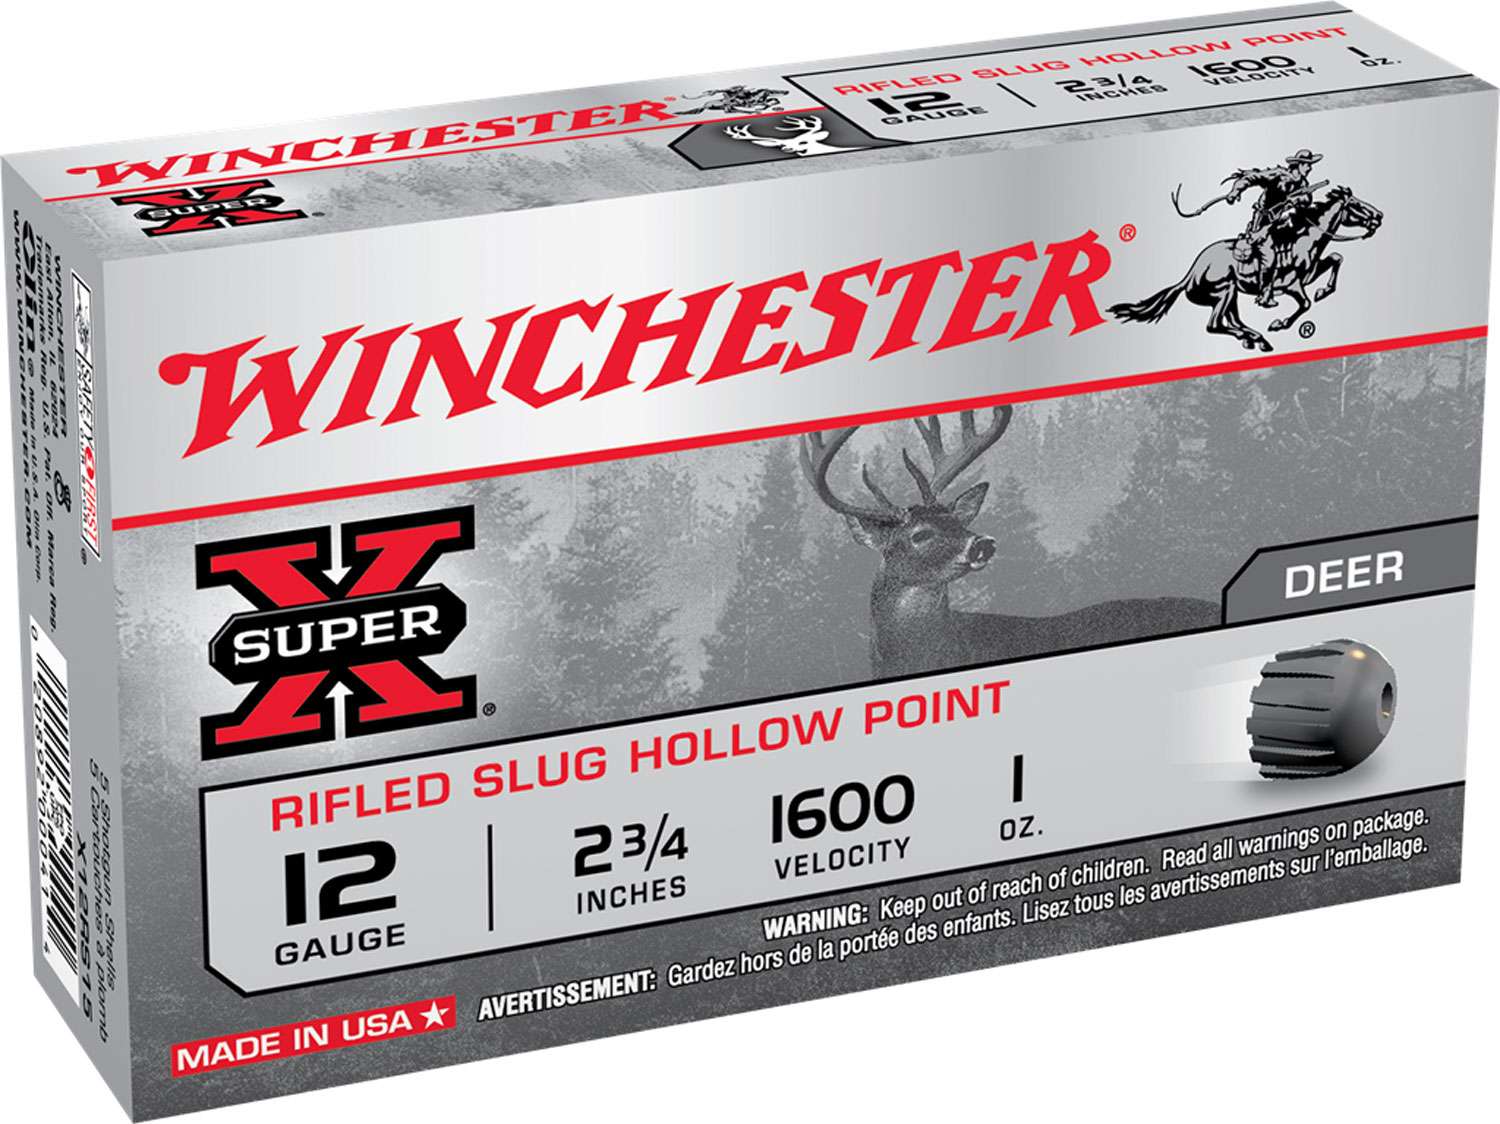 winchester-ammo-x12rs15-super-x-12-gauge-2-75-1-oz-1600-fps-rifled